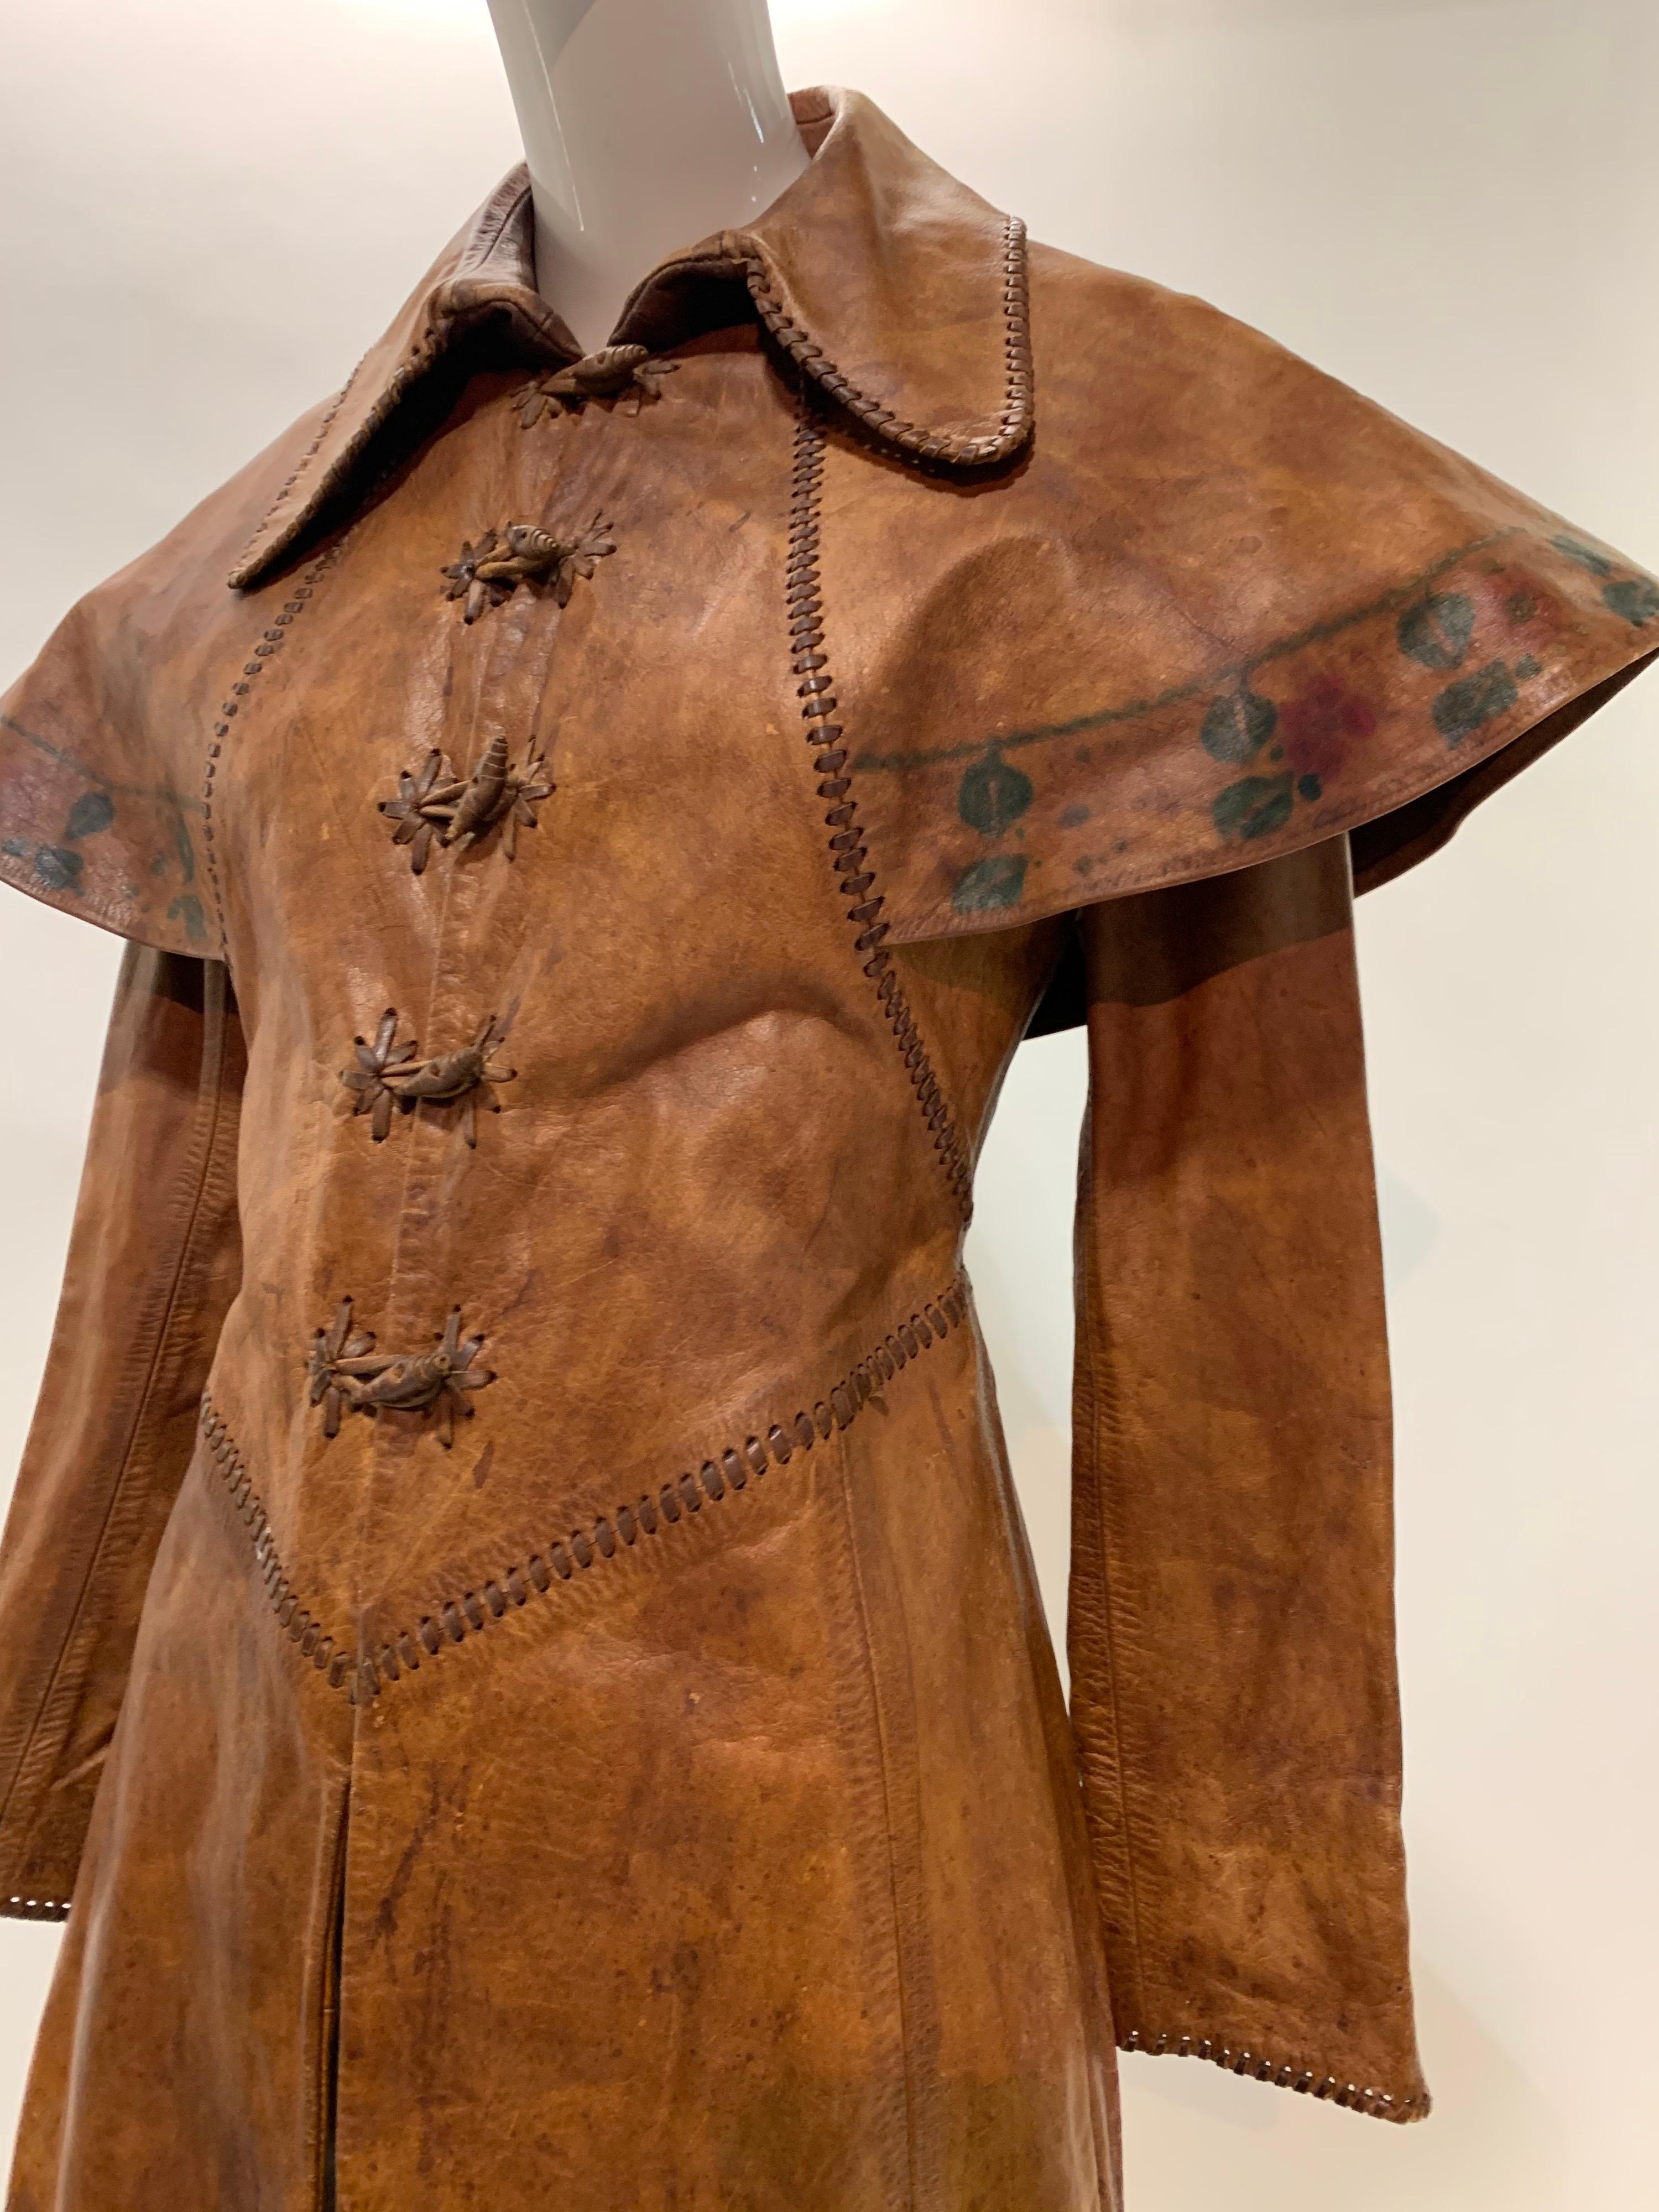 A very unusual 1970s hand-made distressed leather women's trench coat in a fairytale style with integral caplet, toggle front closures and hand-painted floral trim. Pointed Elizabethan waistline at front and back. Size 4-6. 